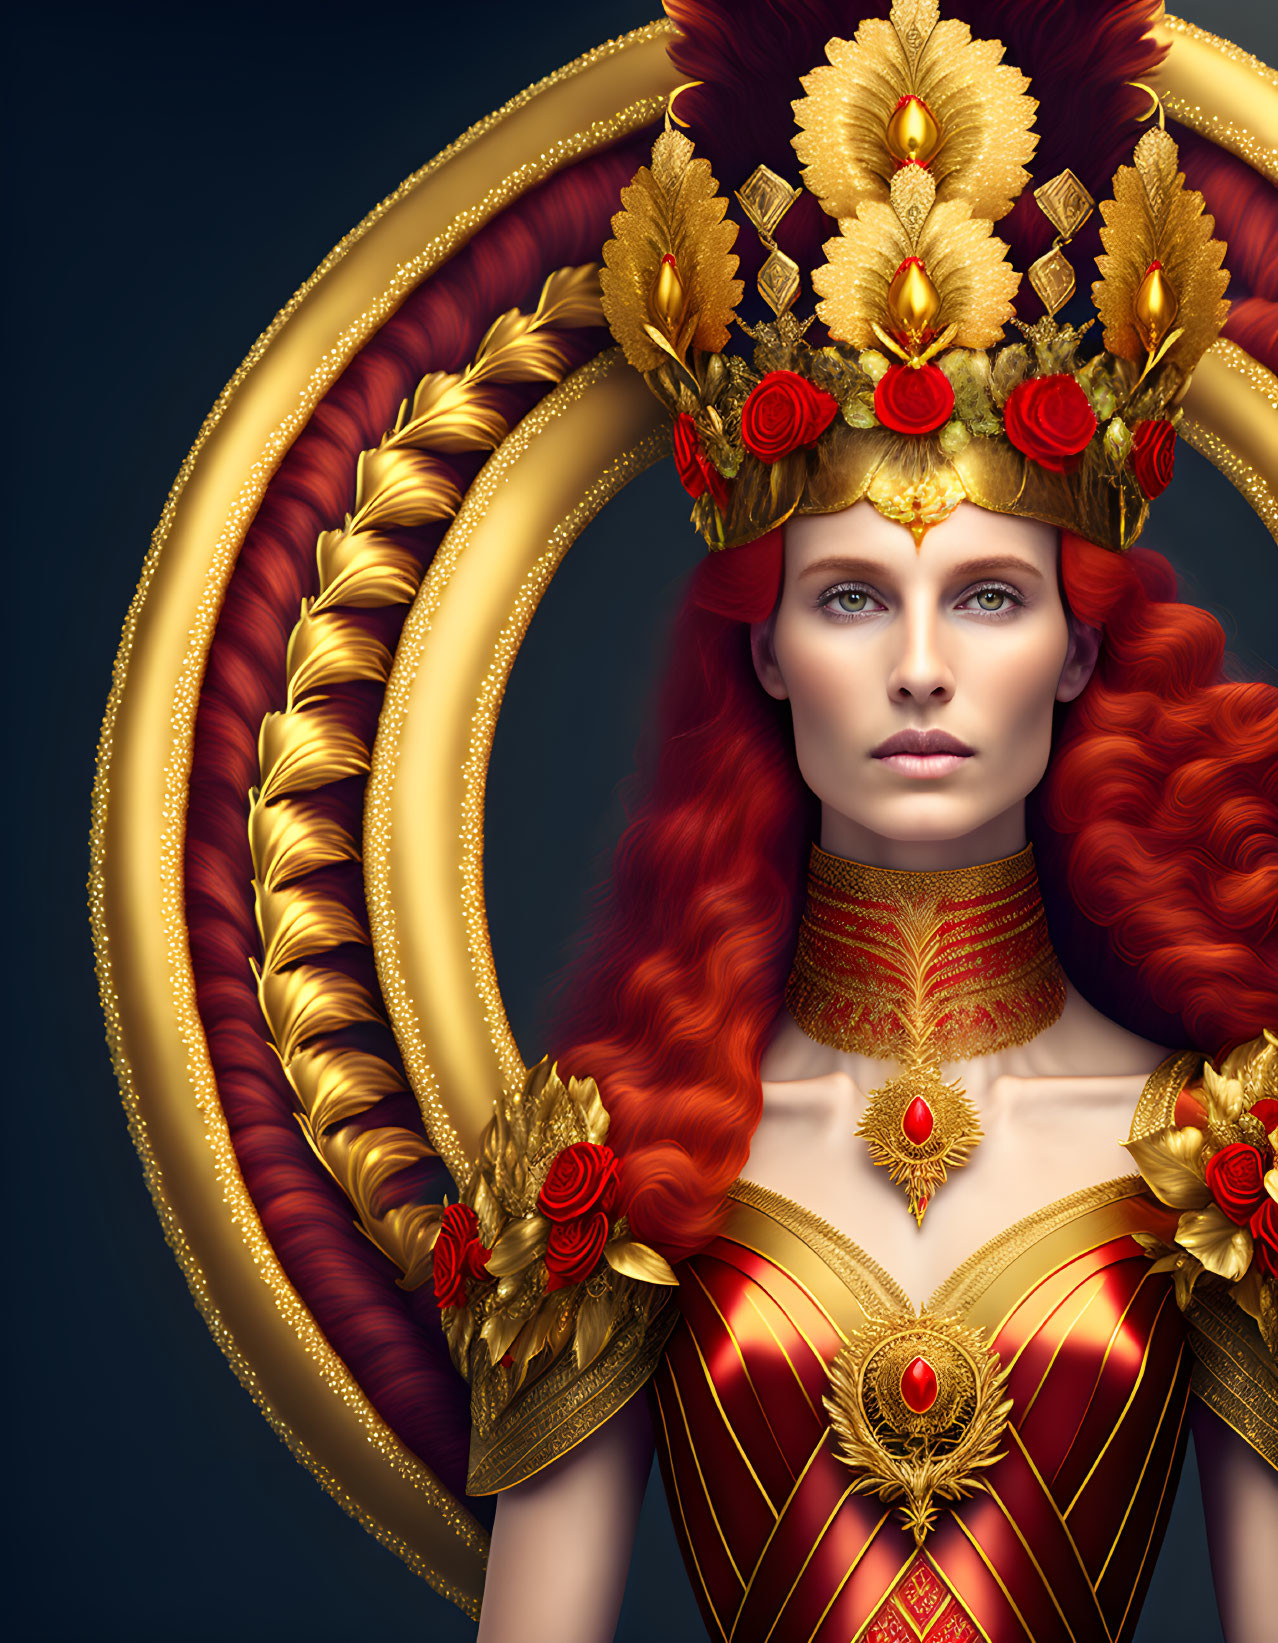 Regal woman with intricate gold and red headdress and fiery red hair against dark background